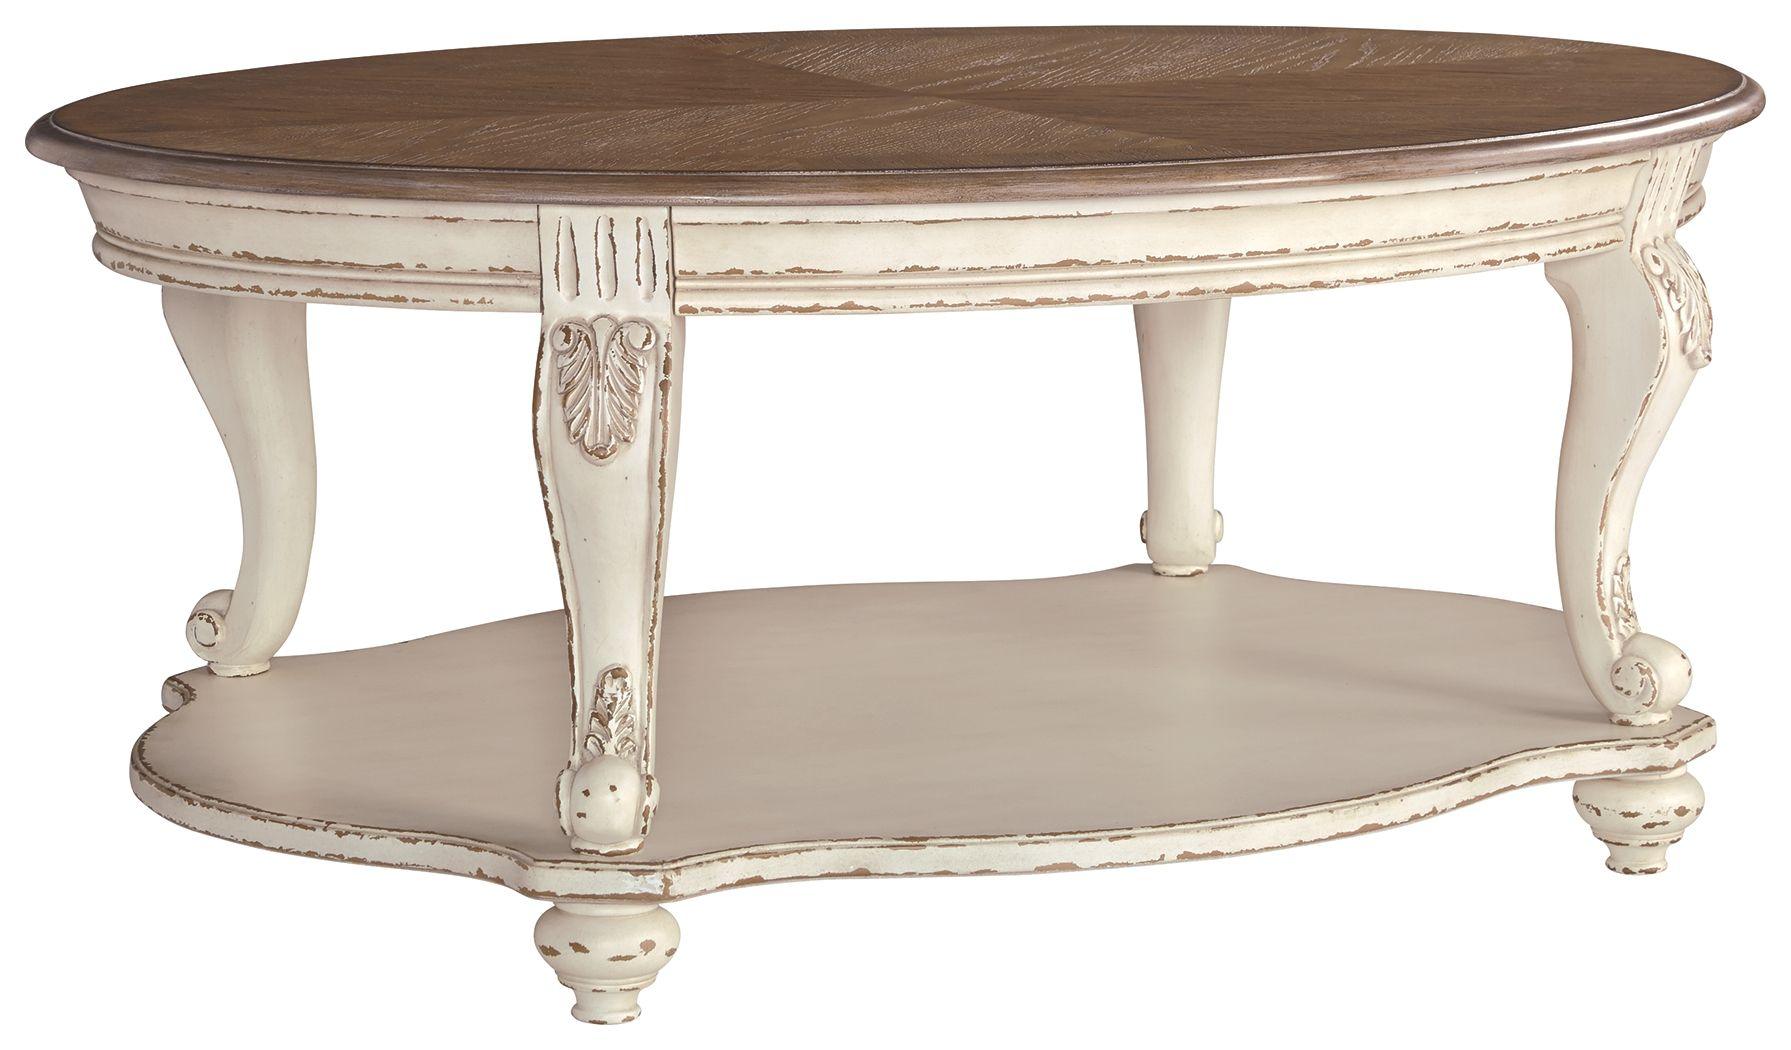 Ashley Furniture - Realyn - White / Brown - Oval Cocktail Table - 5th Avenue Furniture